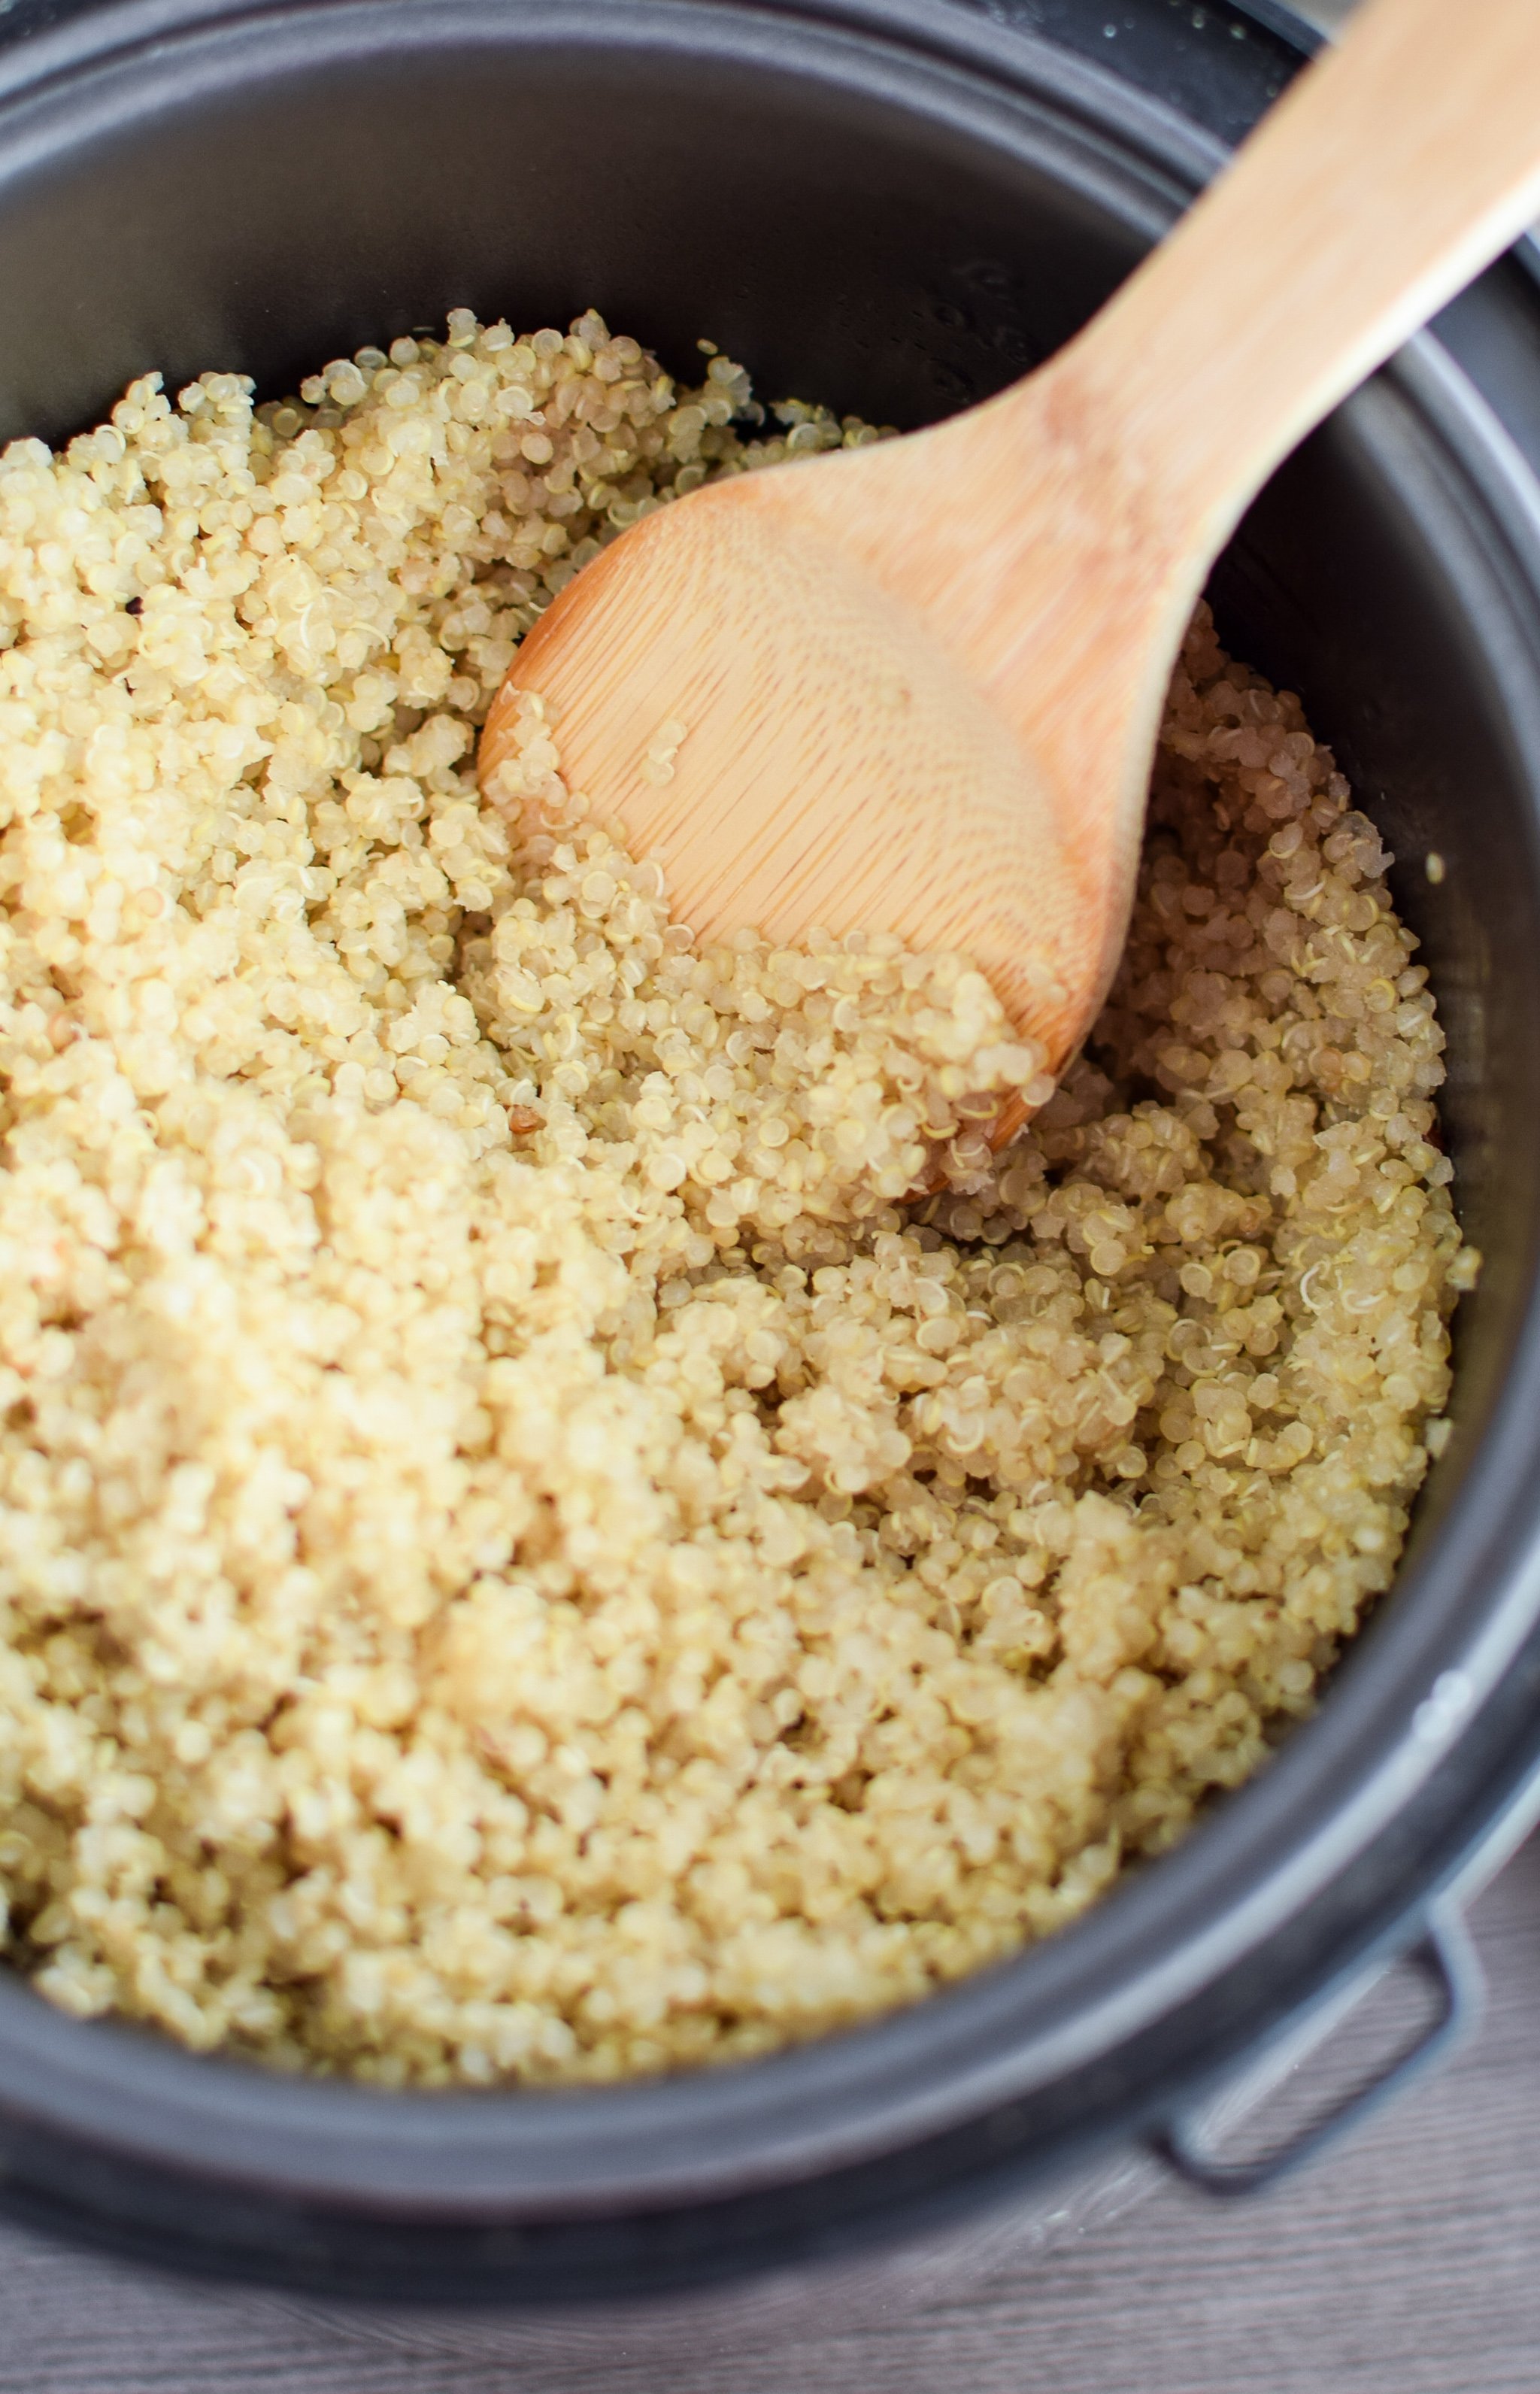 How to Cook Quinoa - How To Do It